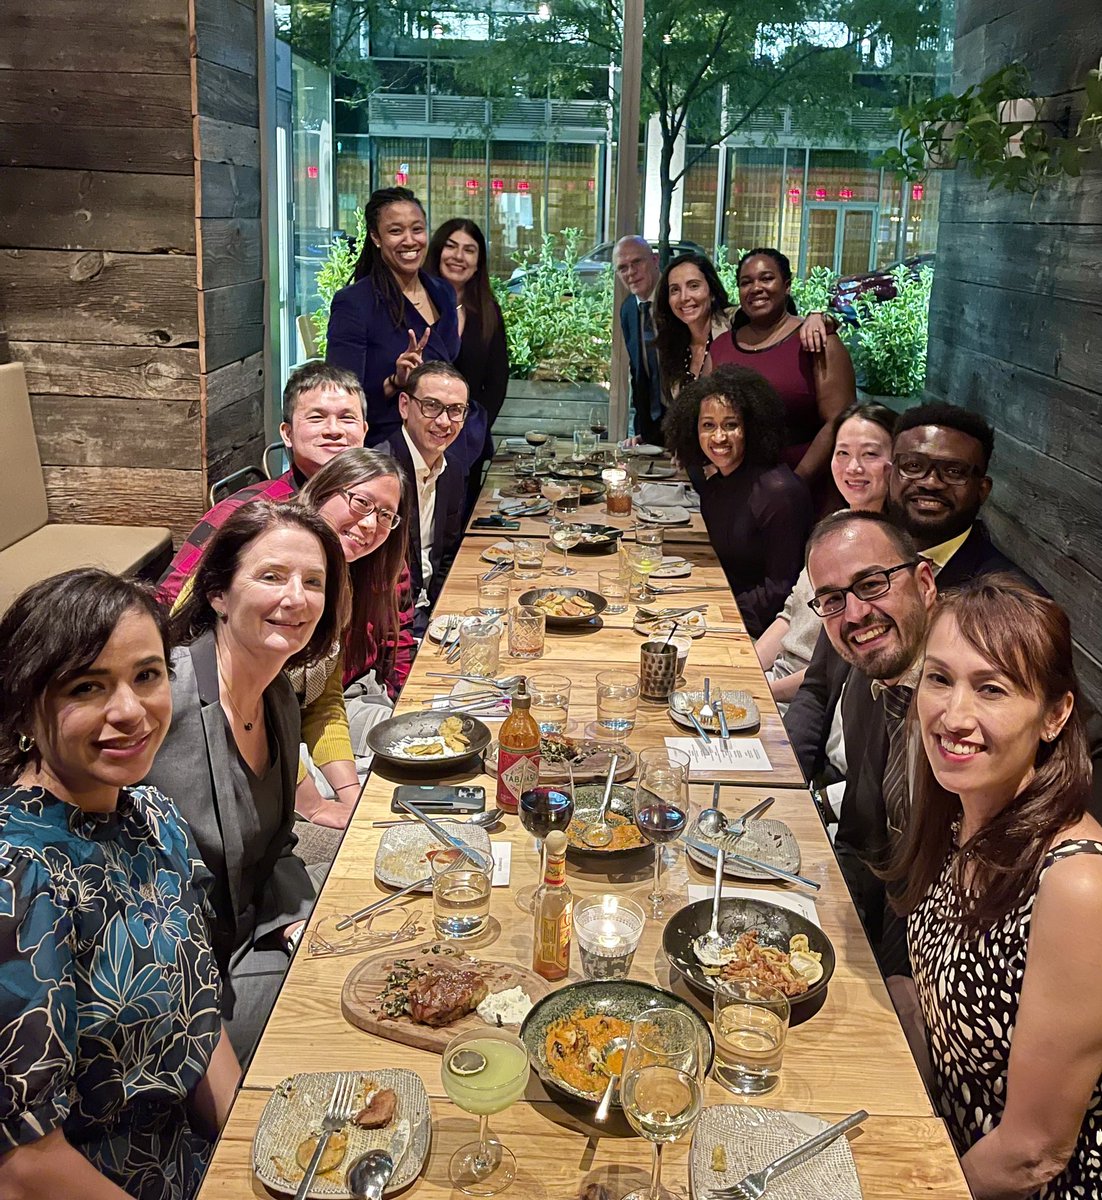 Celebrating our @OpNotes graduating chiefs at #ACSCC23. So proud of this talented group of residents! @HudaMuhammadMD @MD_Dupe @AChanceToCut @CIABoriSurgeon @kirbi_md @SueFuMD1 #SunnieWong